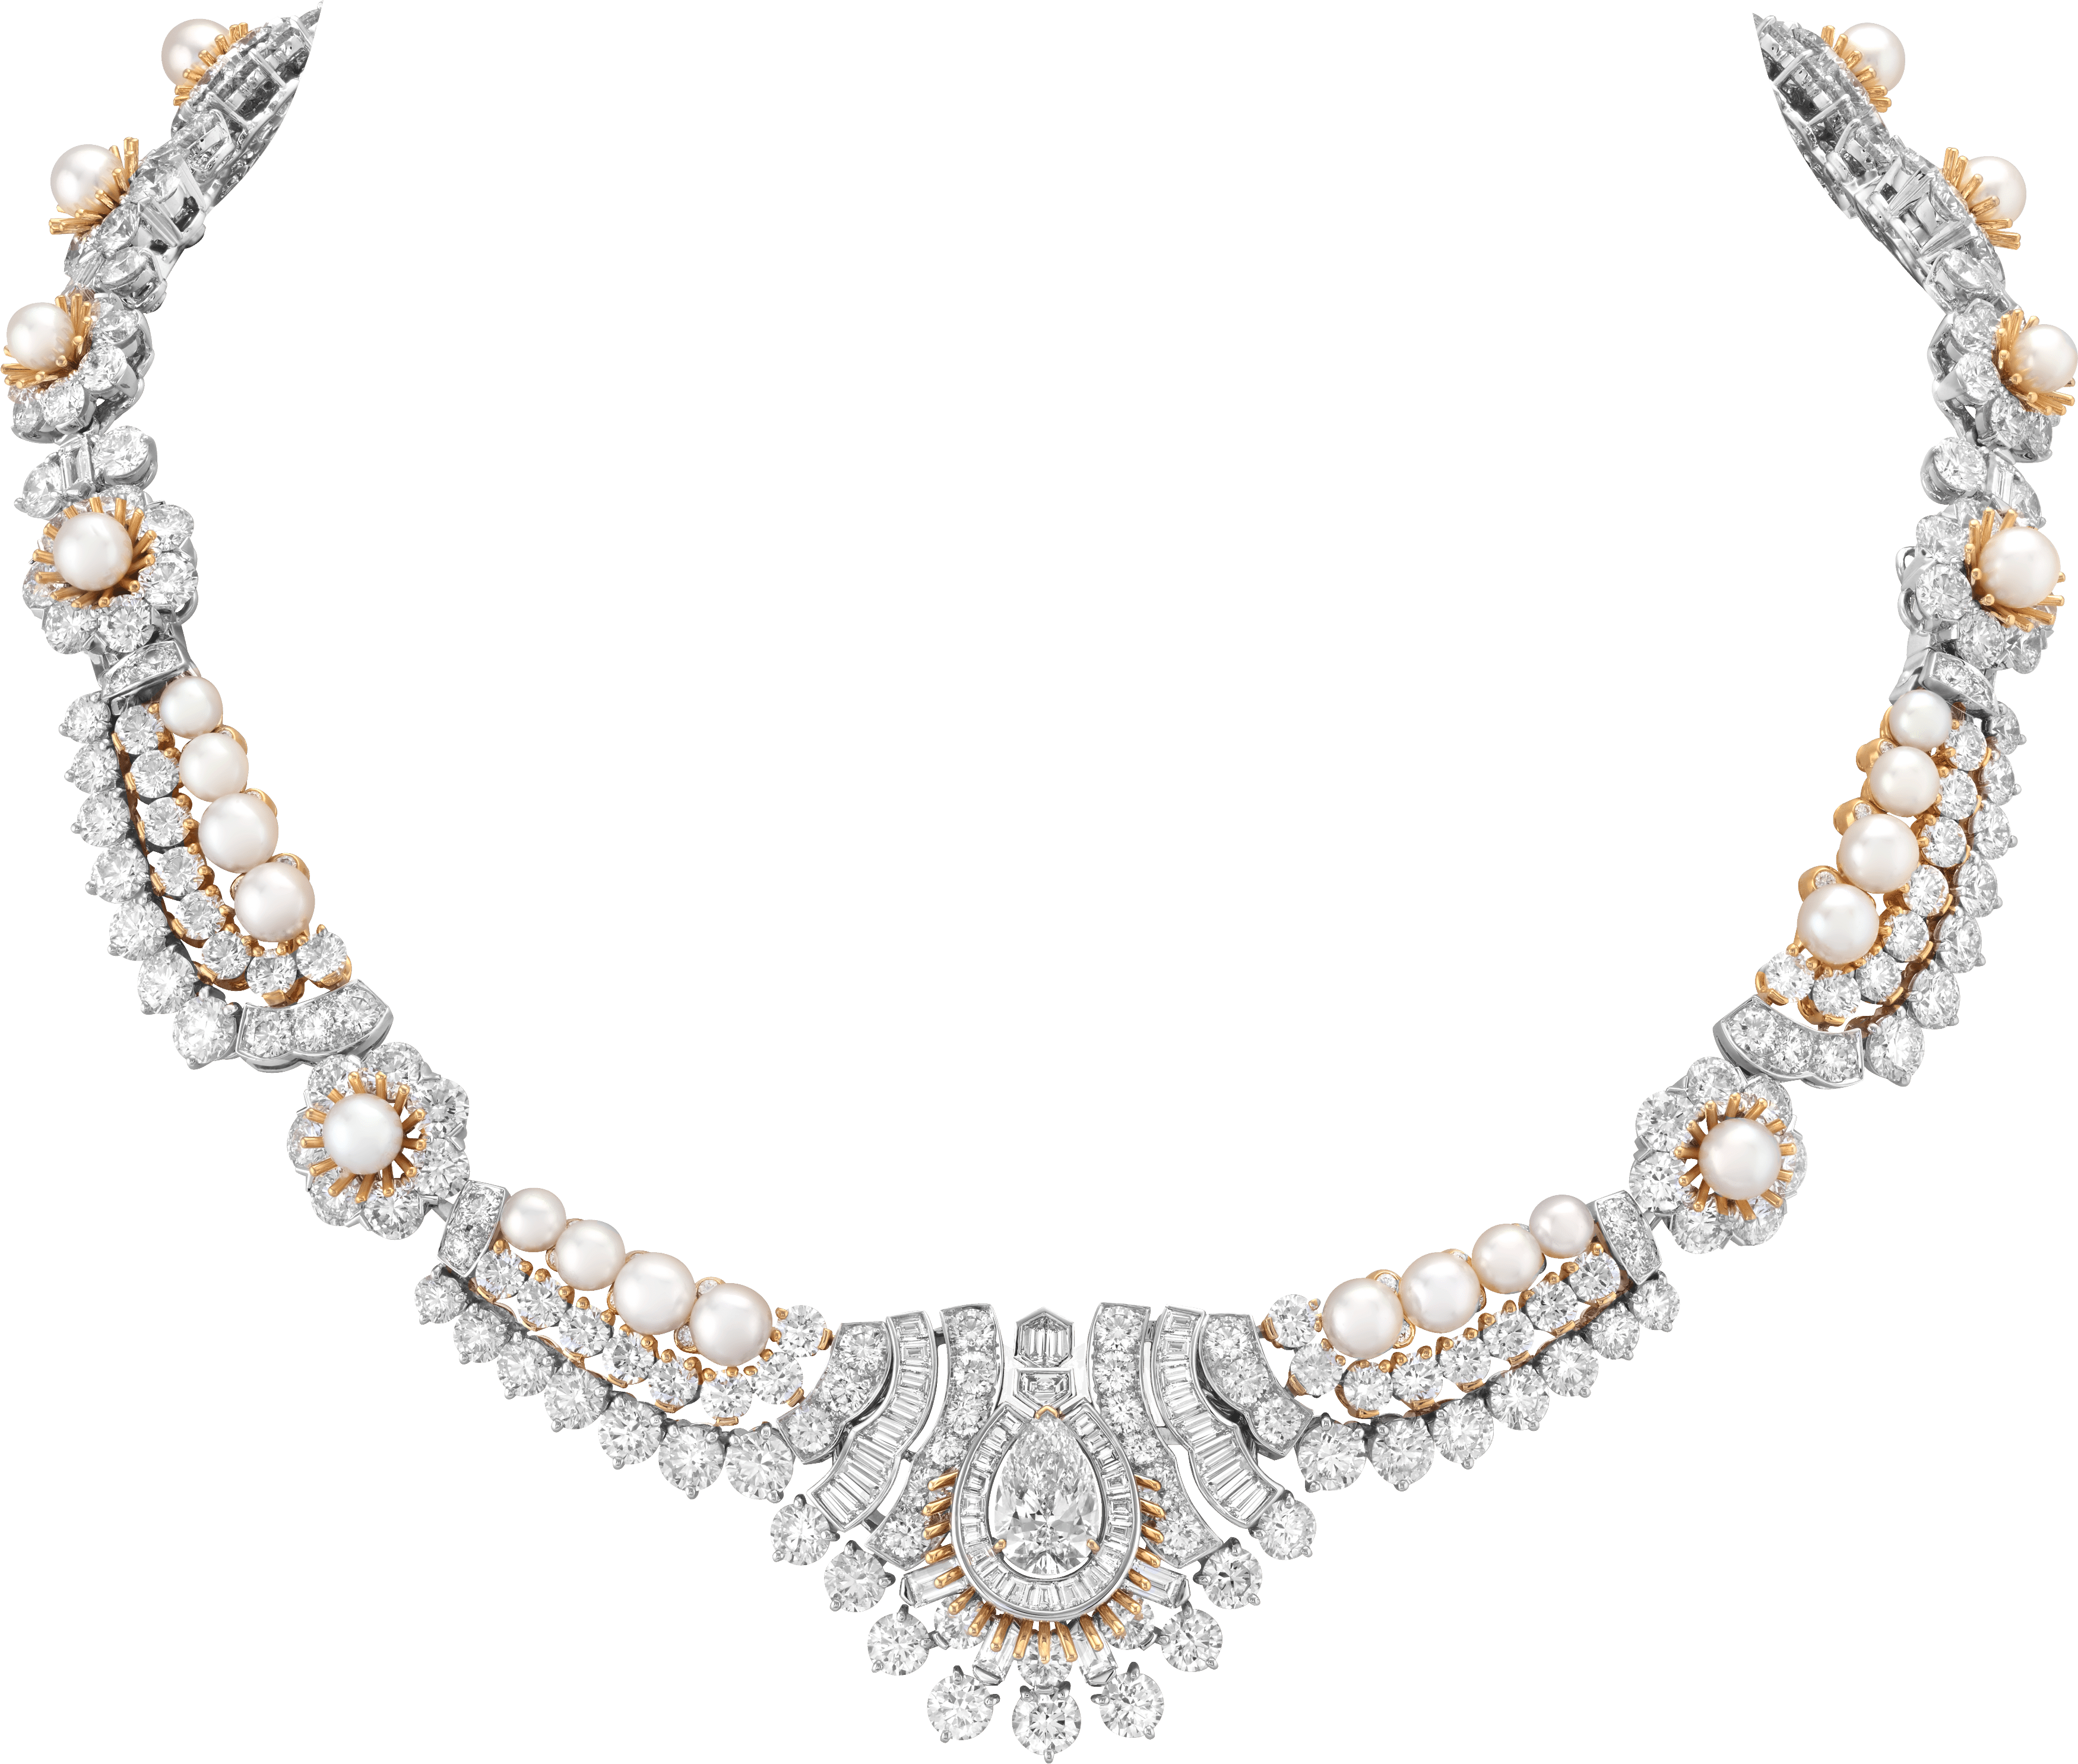 Maison Van Cleef & Arpels – Jewelry and High Jewelry, place